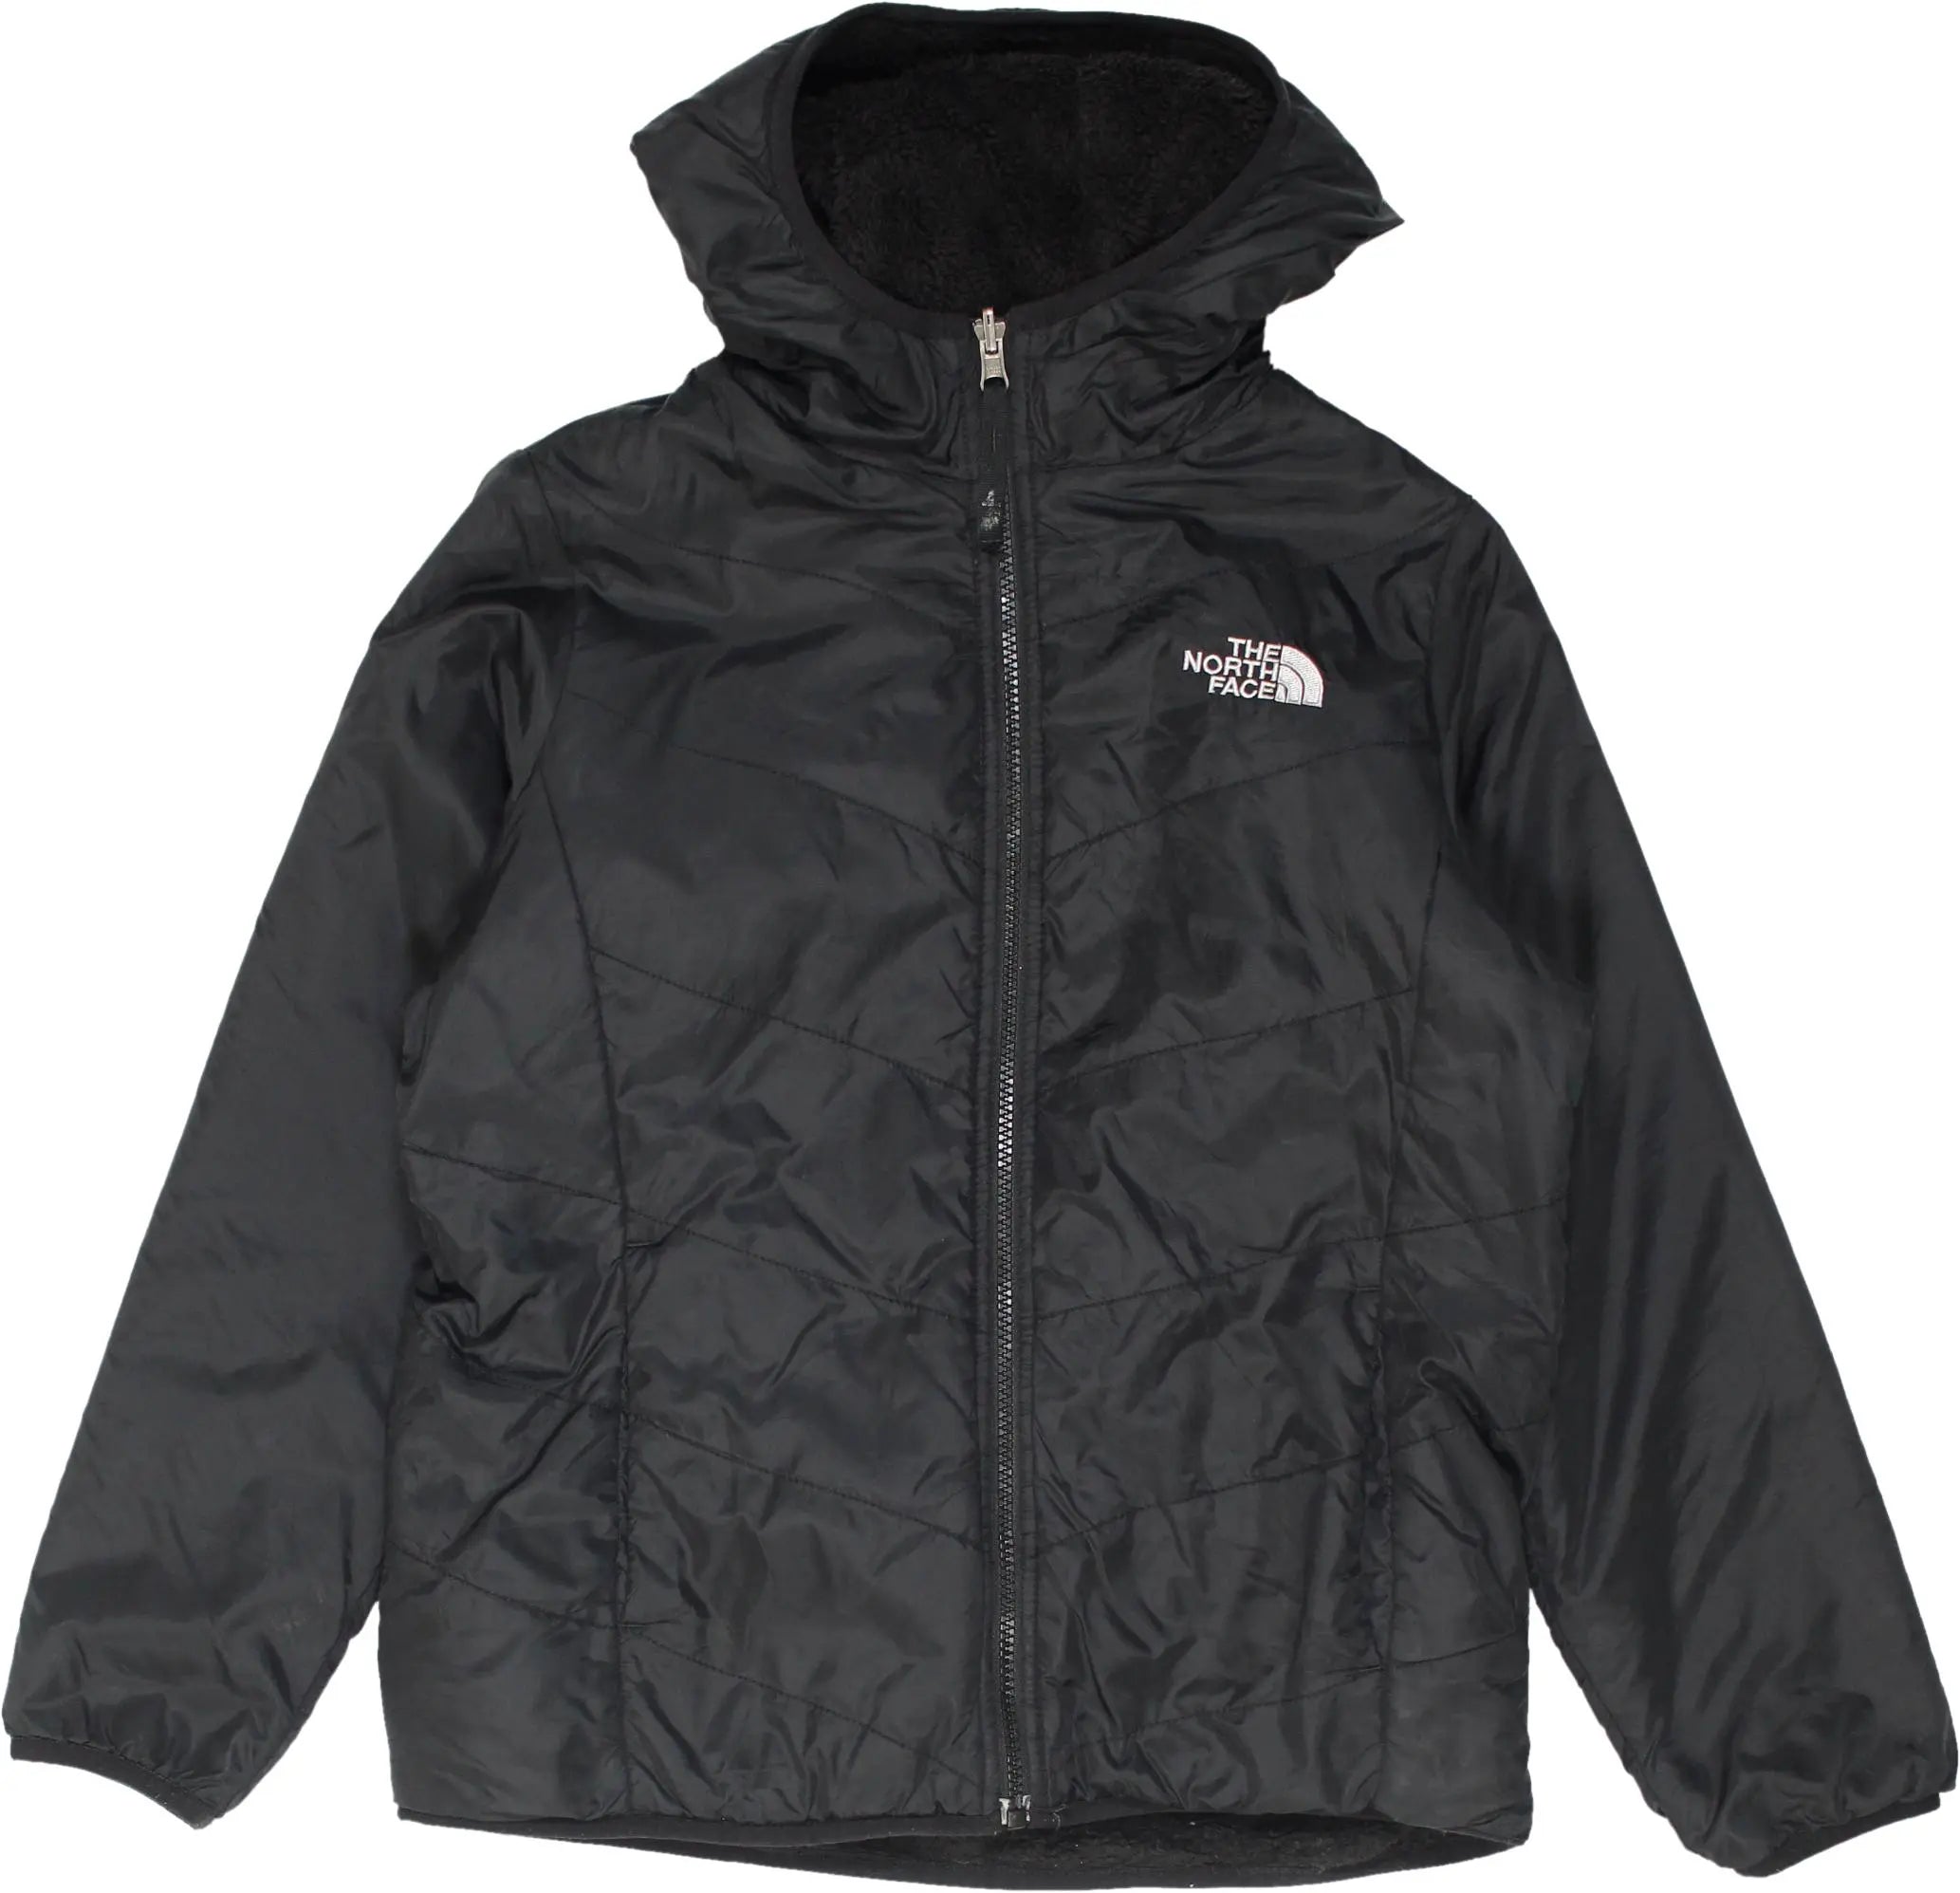 The North Face - The North Face Jacket- ThriftTale.com - Vintage and second handclothing